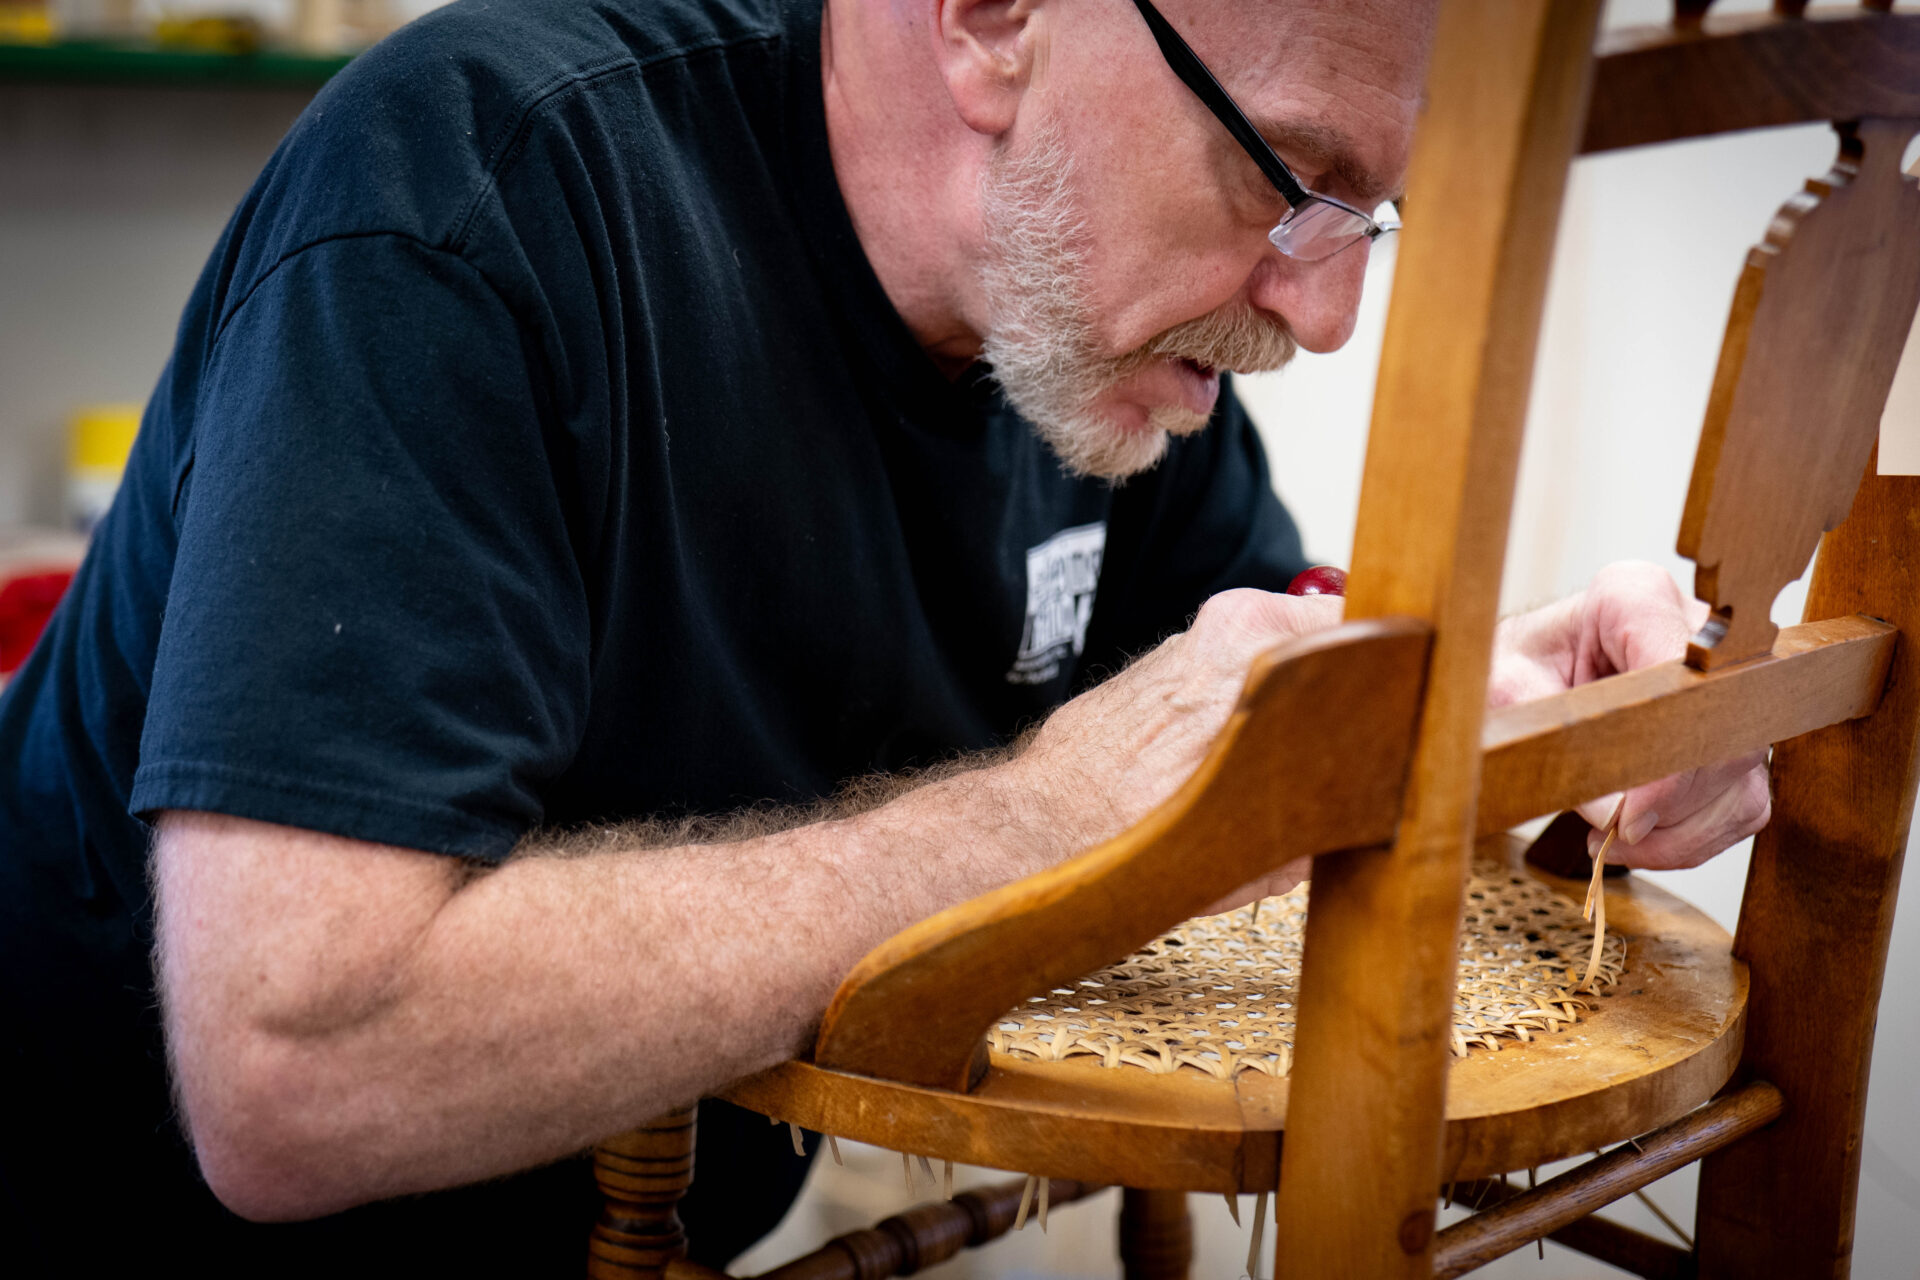 Chair Caning Provides Employment And Community For Folks With Visual Impairments In Wheeling, W.Va.